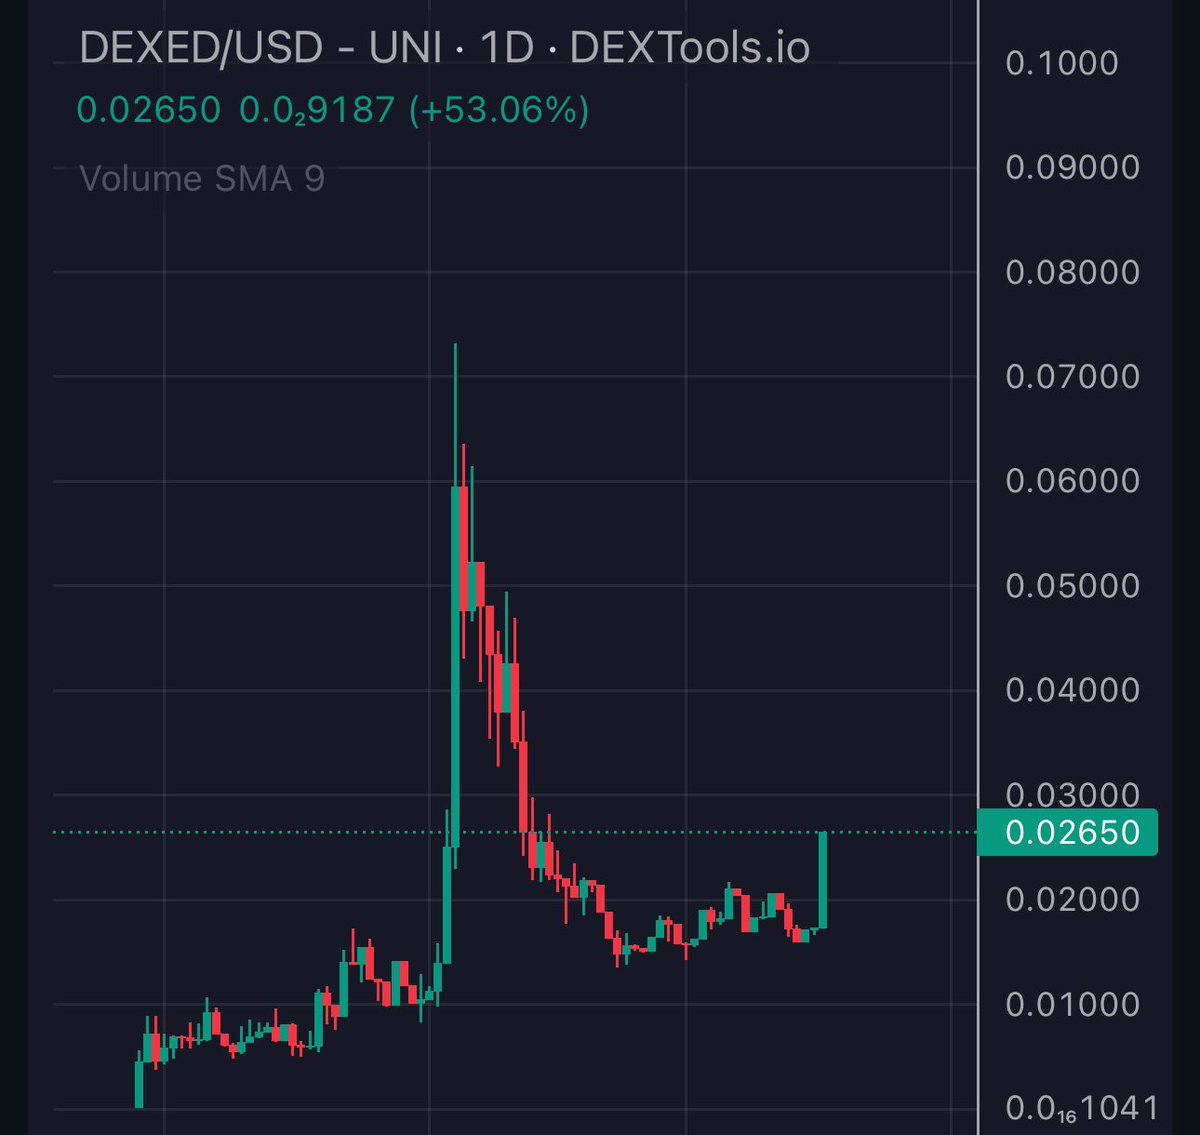 To be completely honest, this is indeed a beautiful chart that seems poised to make a new ATH now. 

The team has taken the project to a higher level in terms of development.

$DEXED 🤝